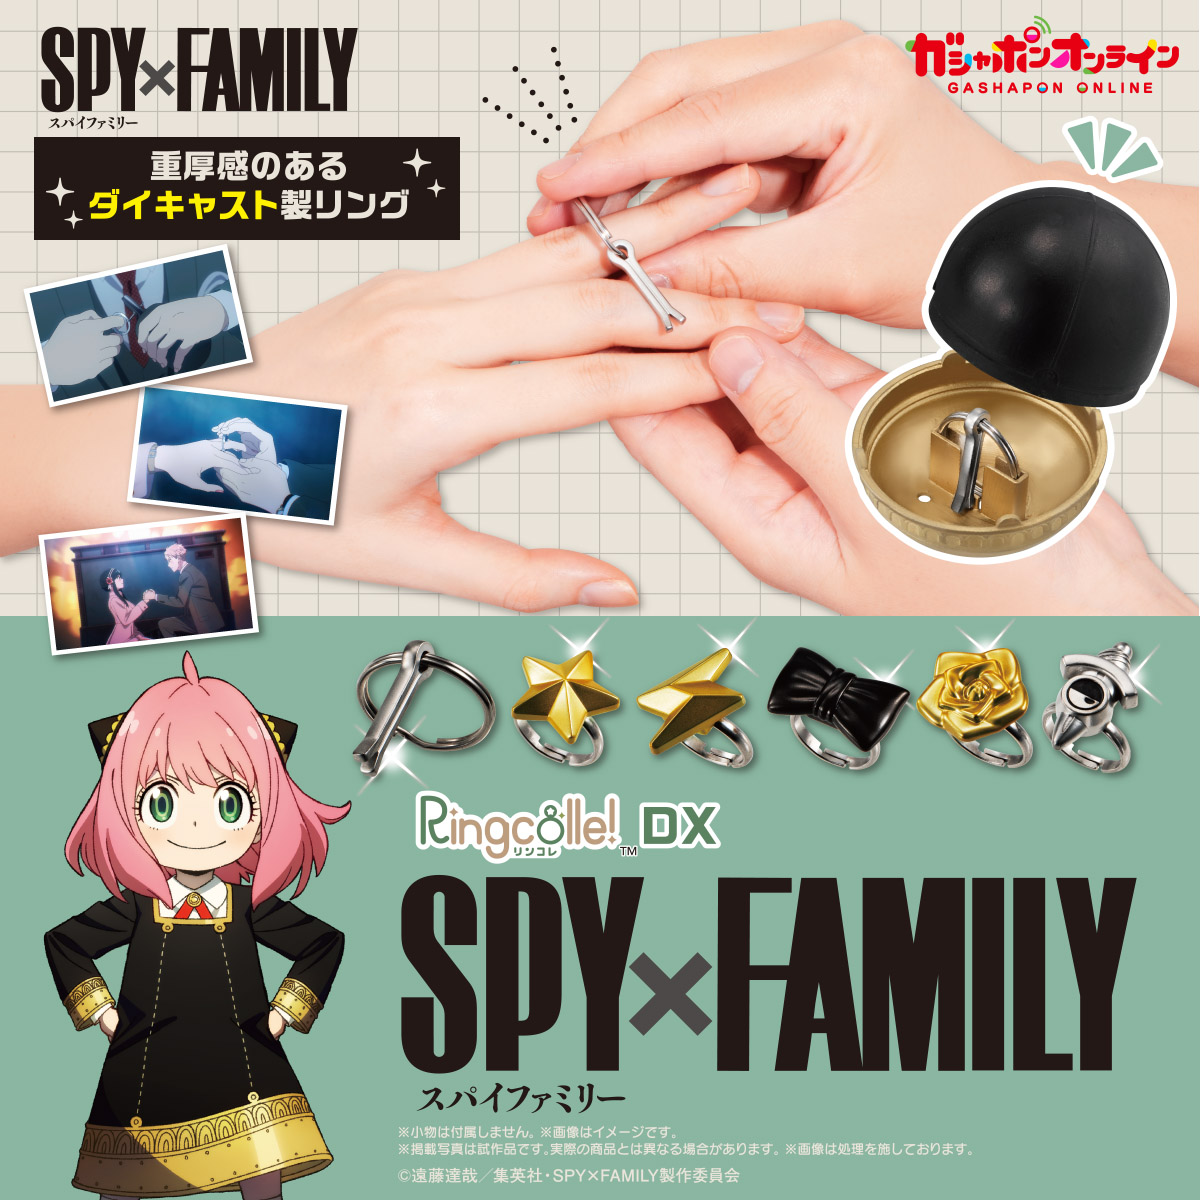 Ringcolle! DX SPY×FAMILY